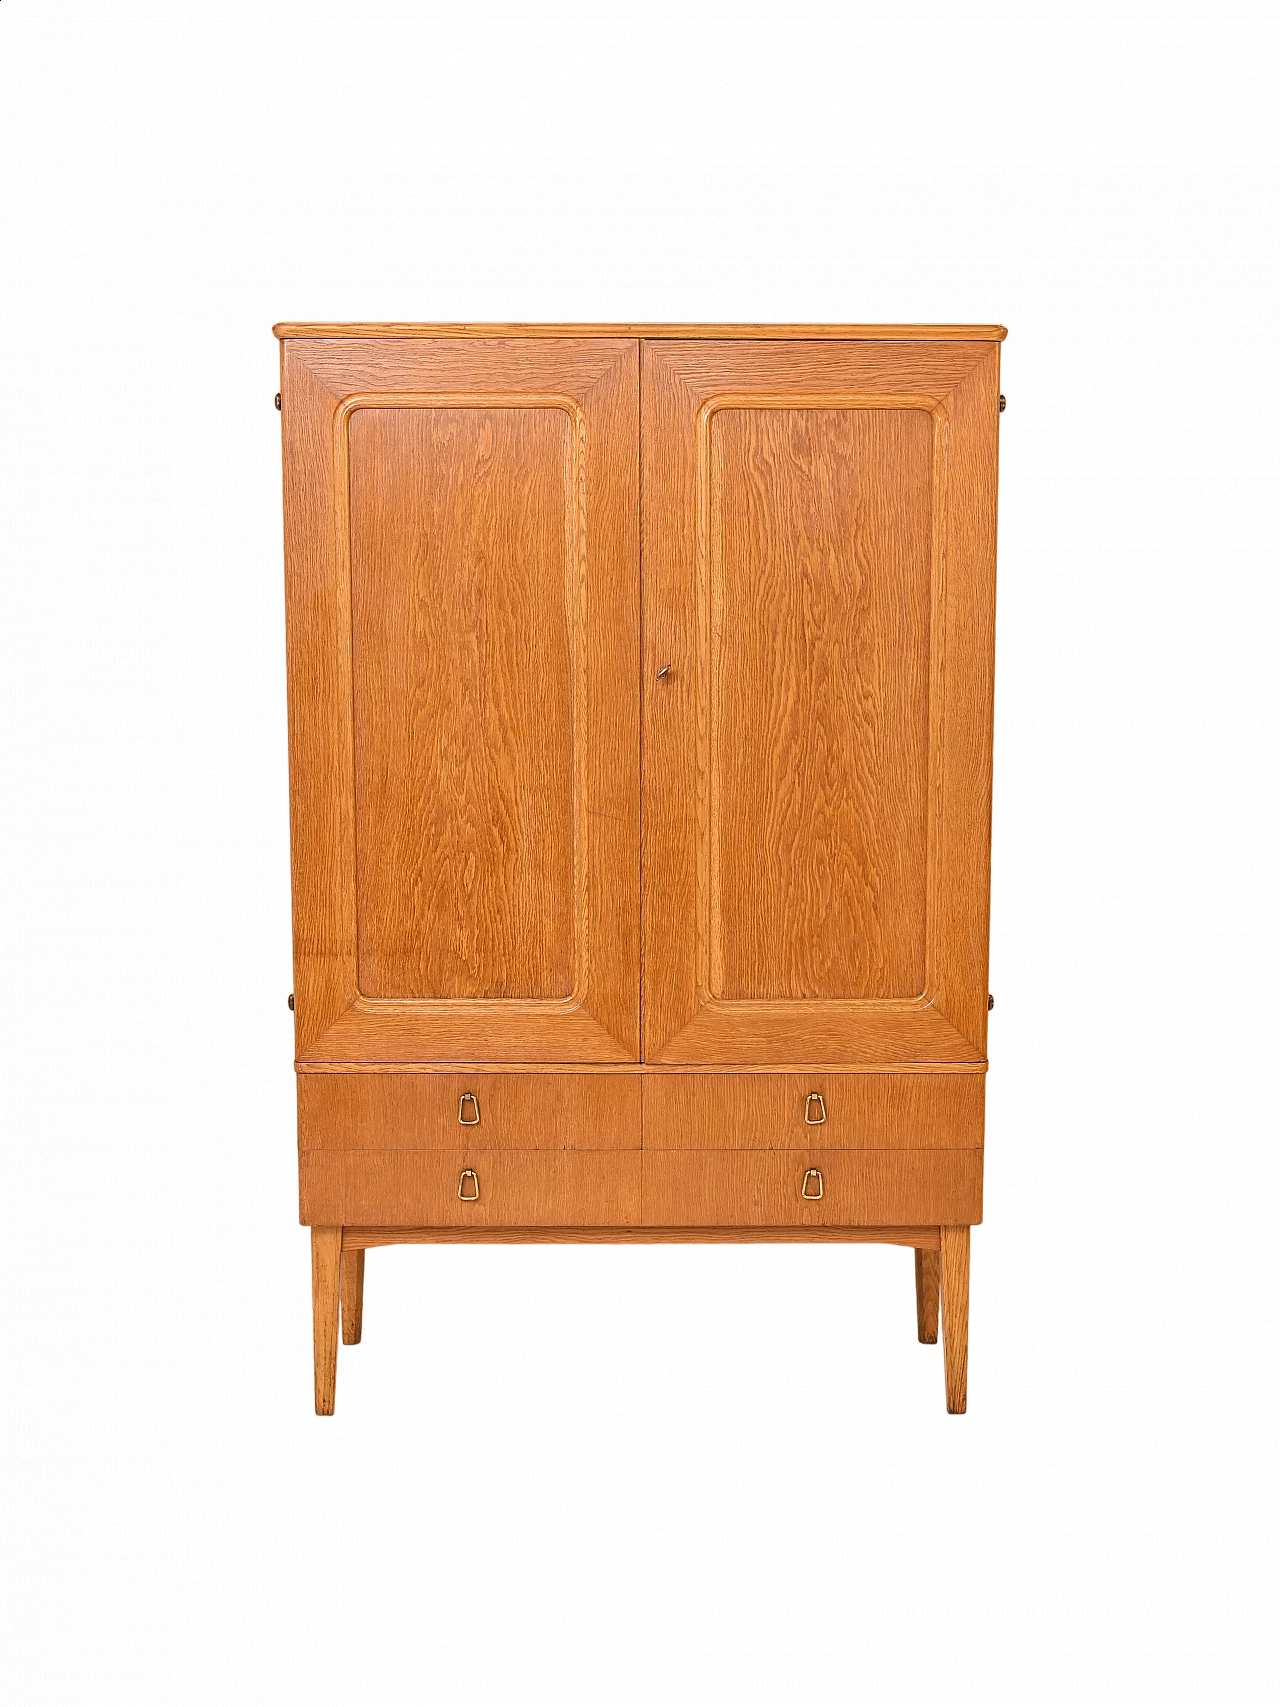 Wooden wardrobe with shaped doors and drawers, 1950s 22